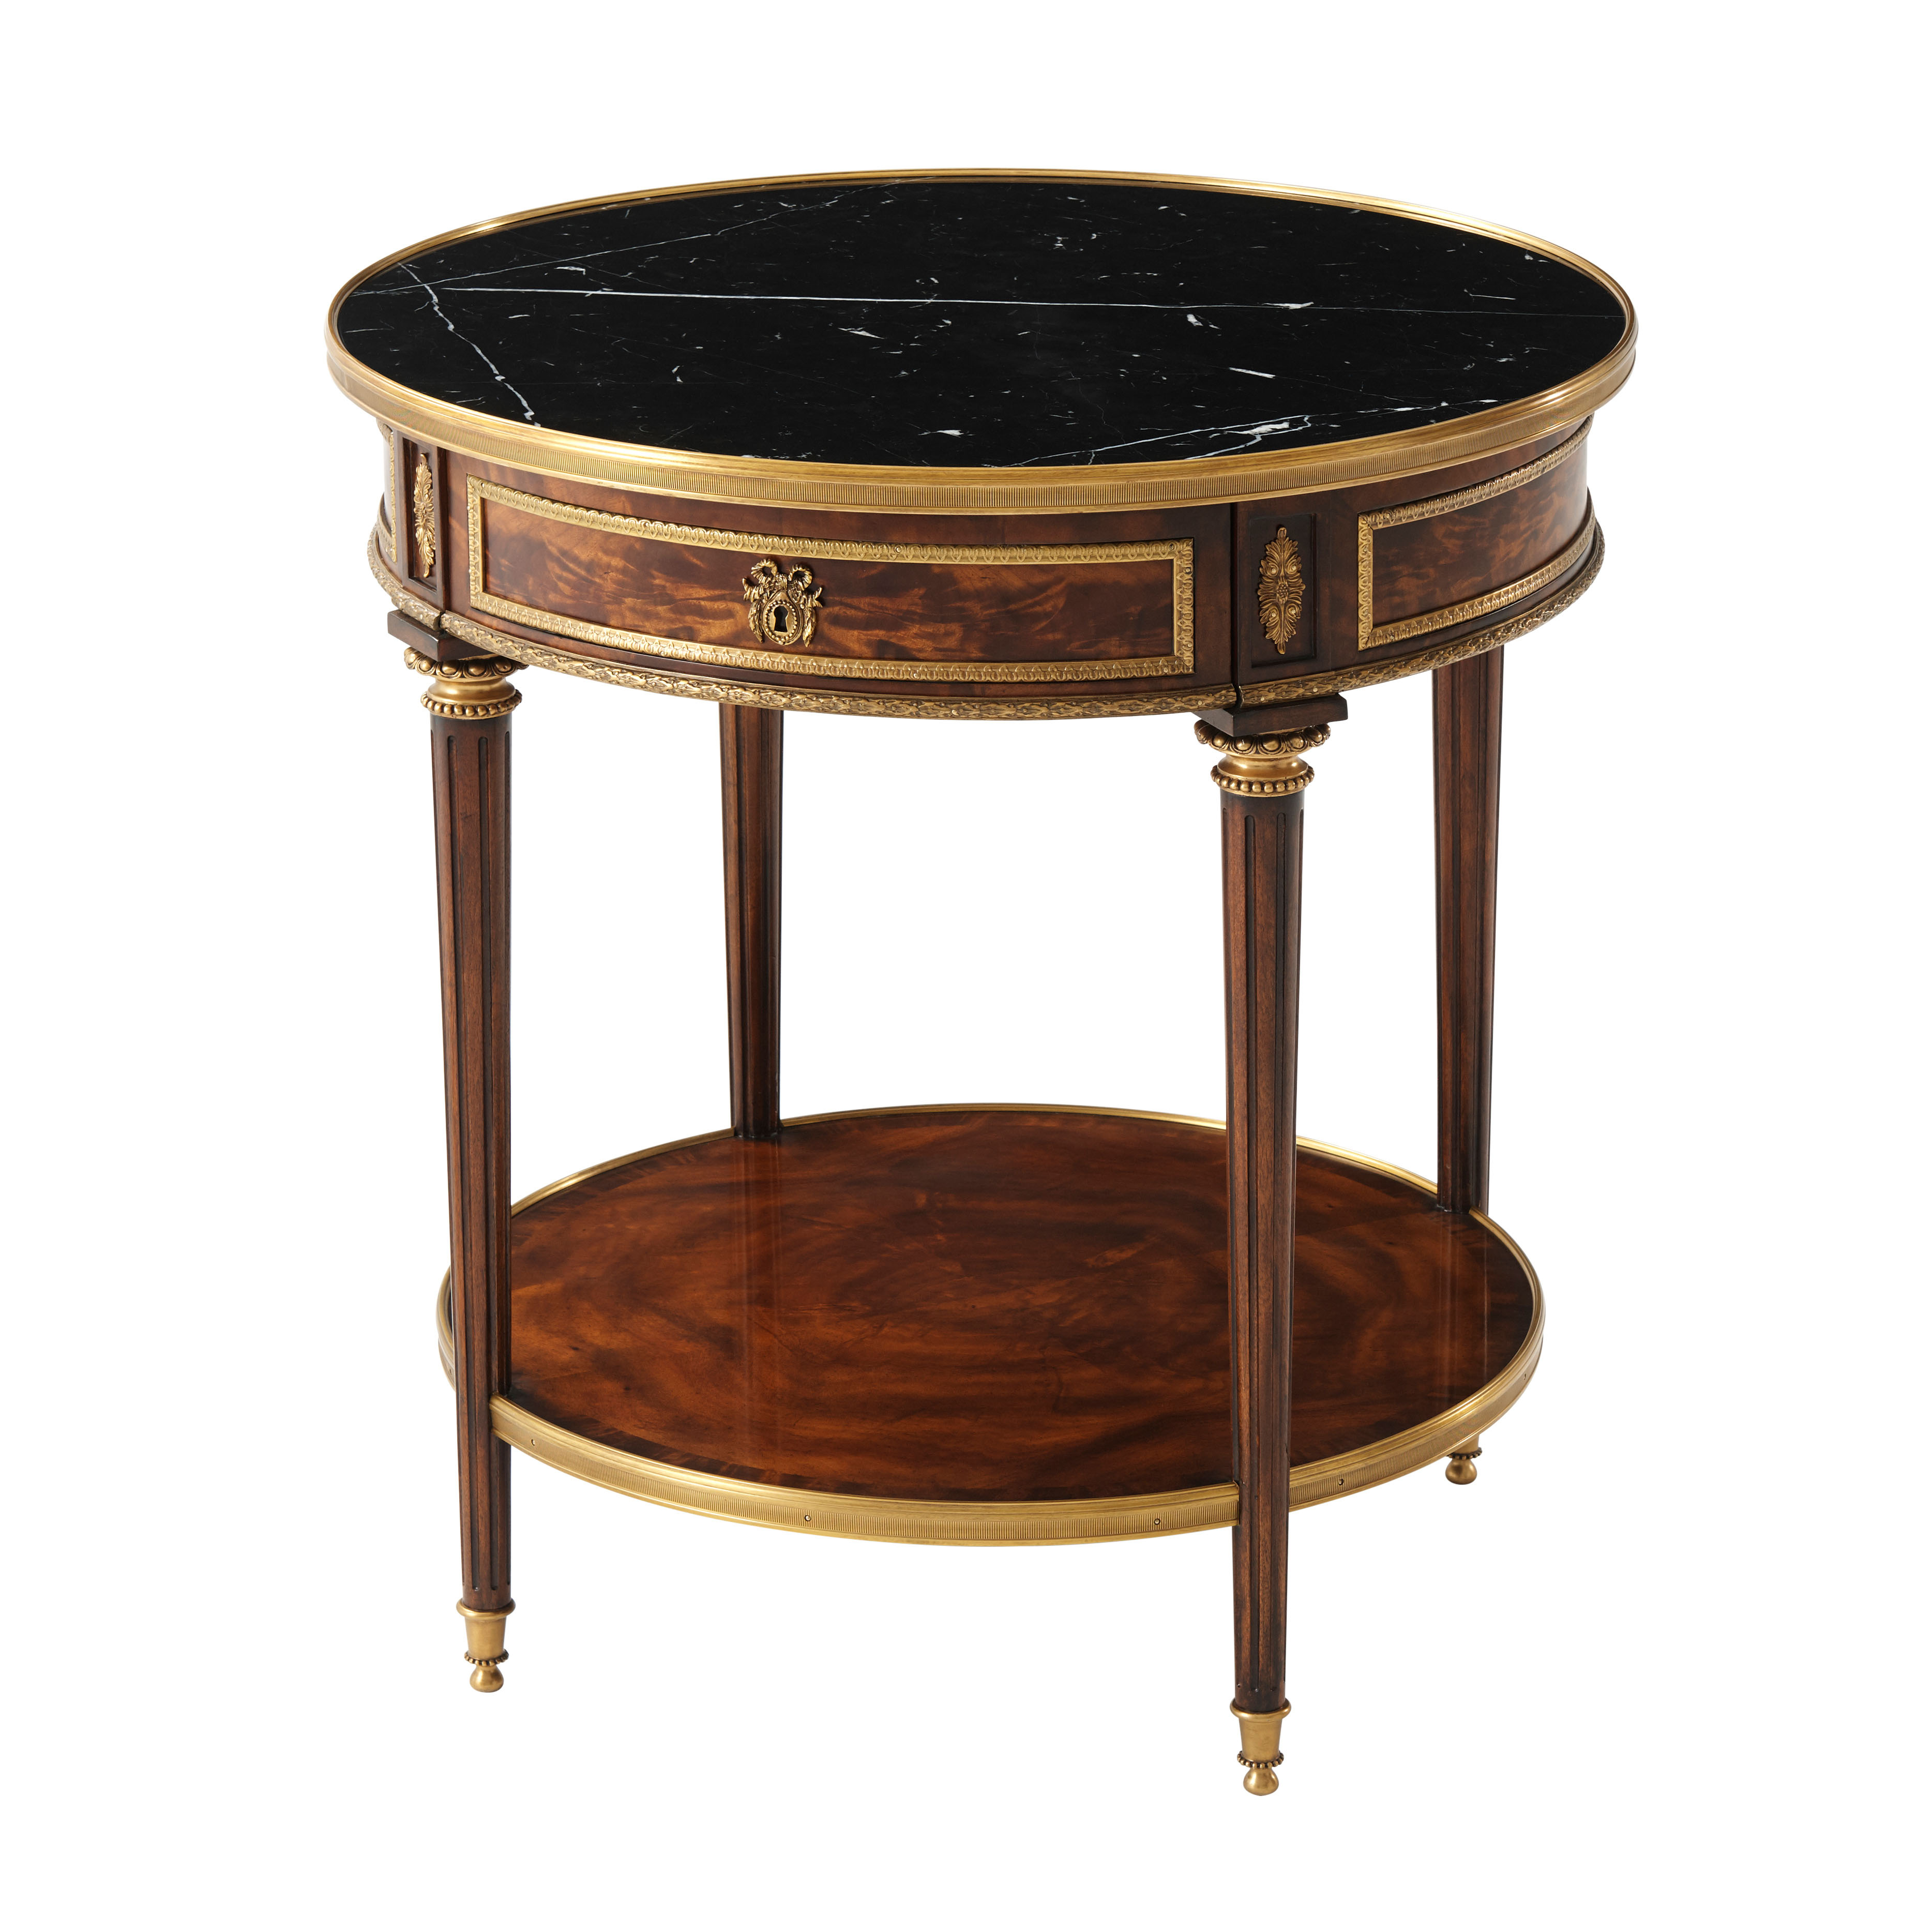 FORMALITIES SIDE TABLE